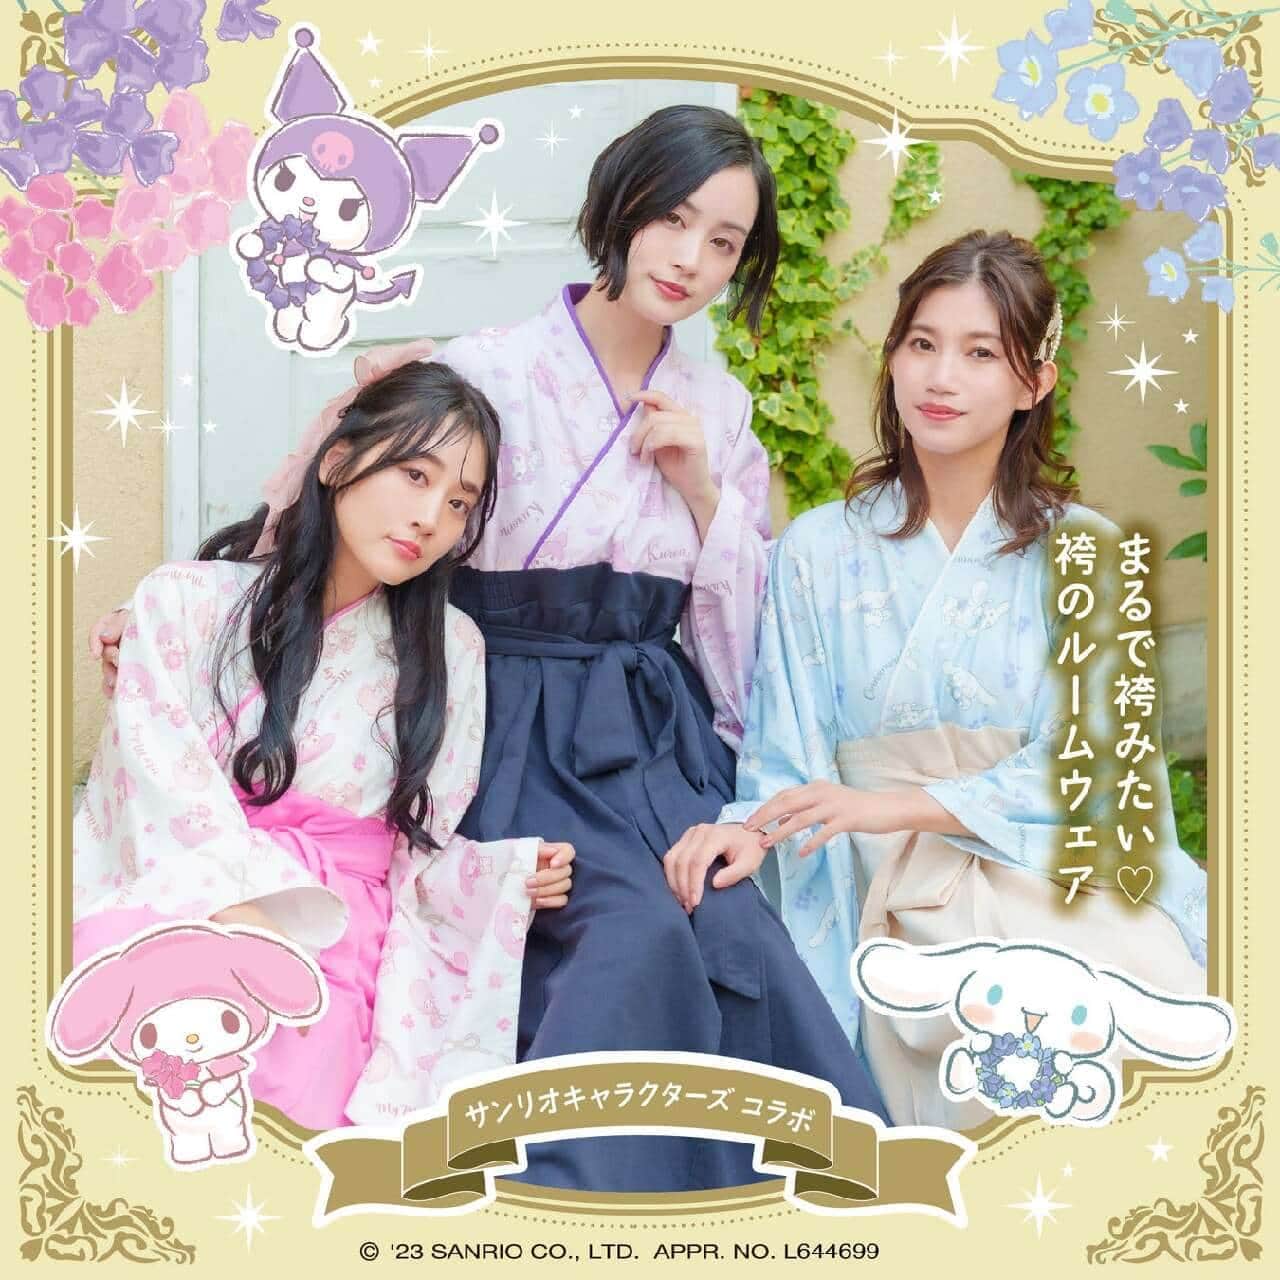 Village Vanguard Online Store will launch "Yuru Hakama" on March 18th, a new item that lets you enjoy Taisho Romanticism in a modern way with Sanrio characters. Image 3